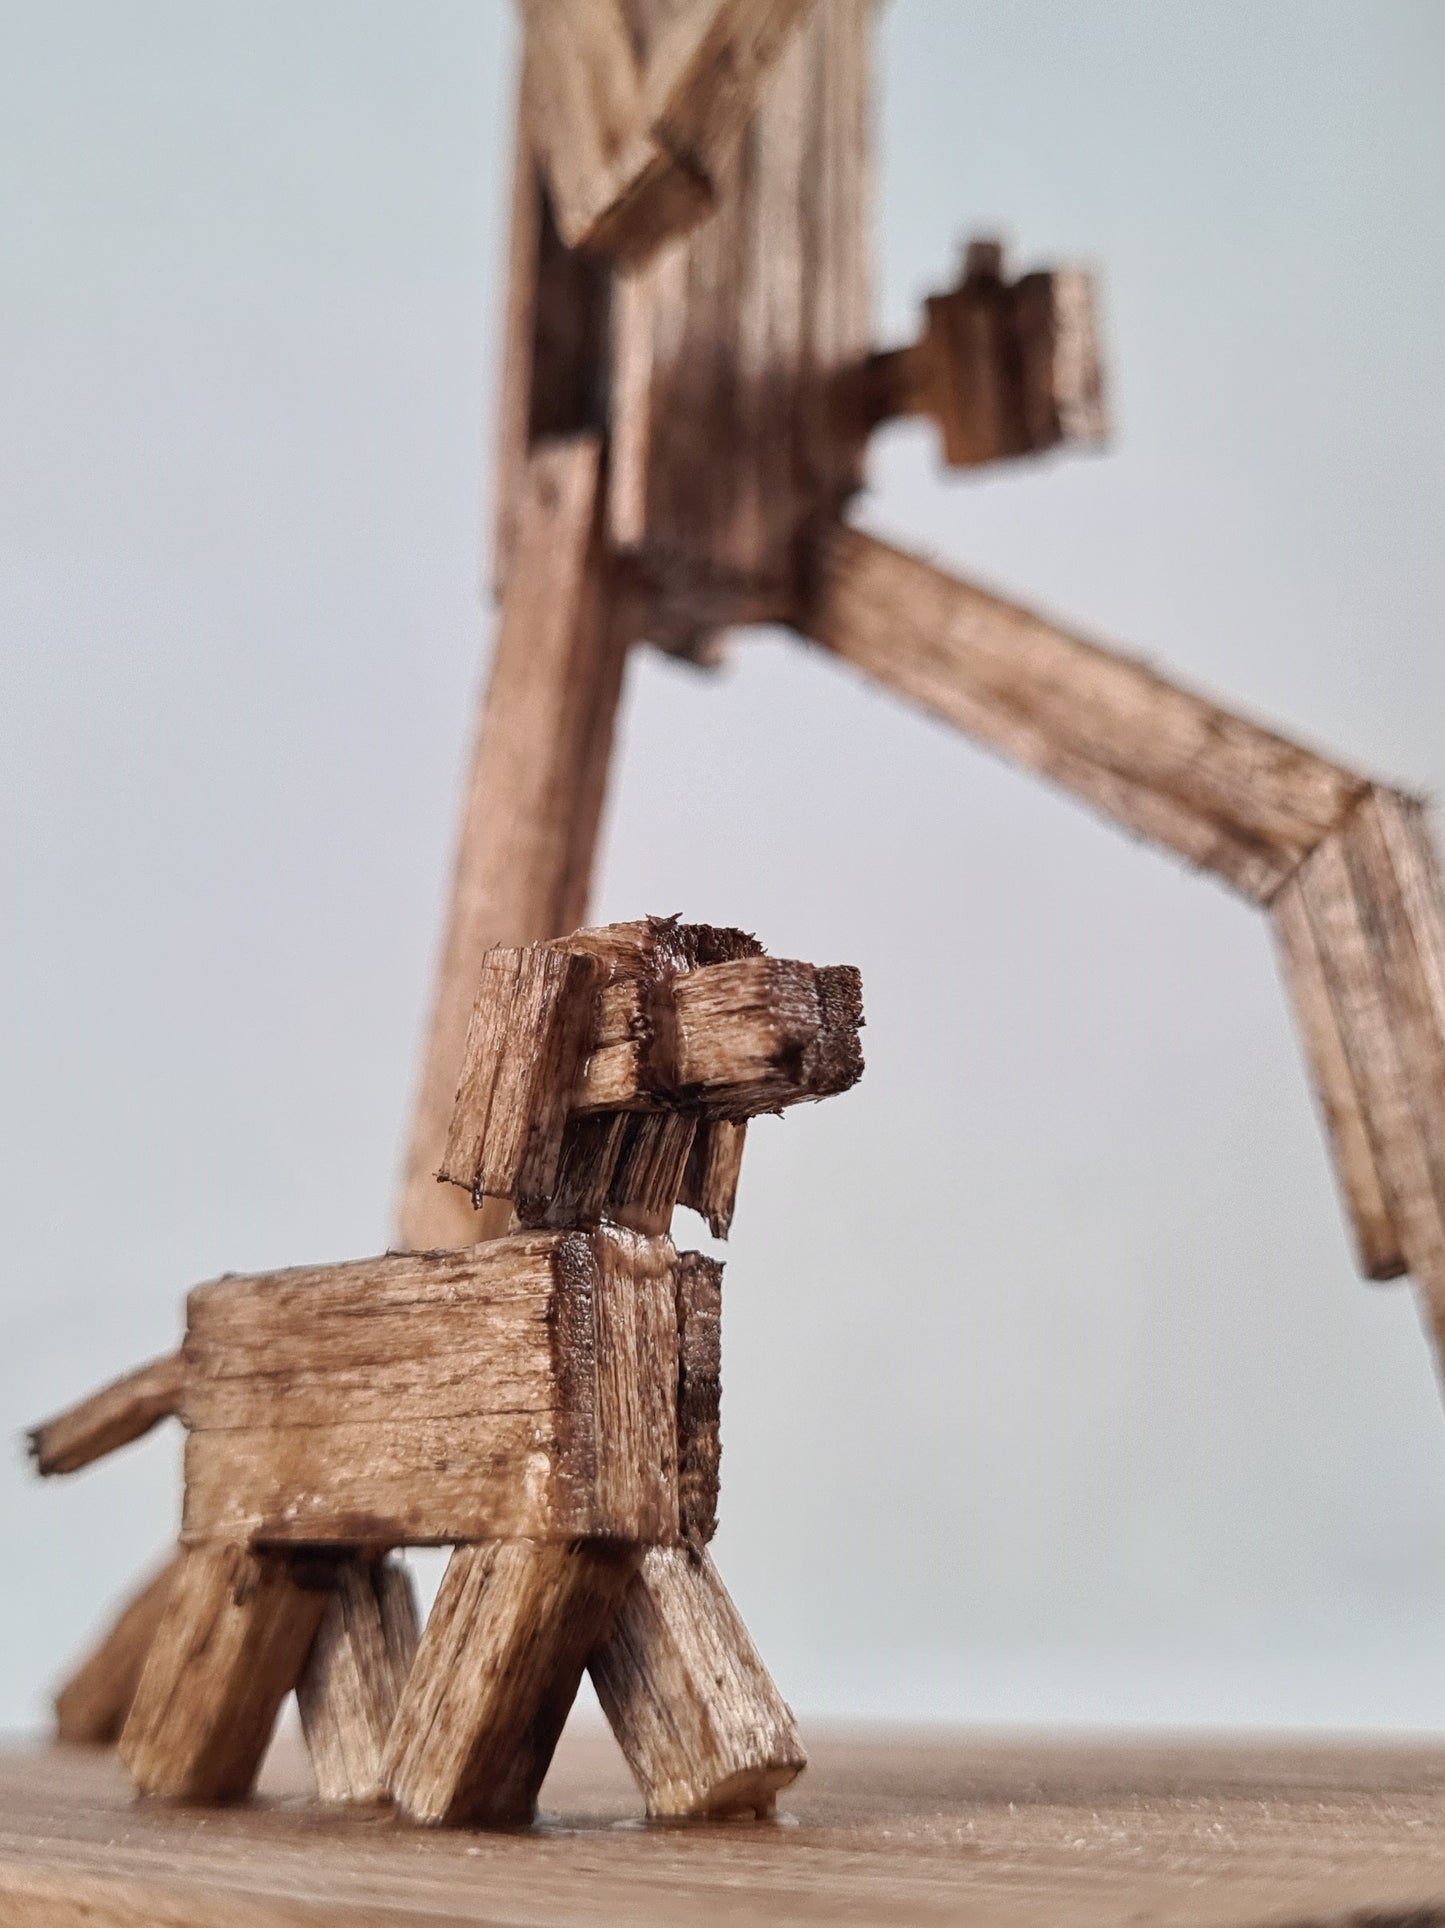 Running With Doggo - Handcrafted Wooden Matchstick Figures - Gifts, Ornaments and Decor By Tiggidy Designs